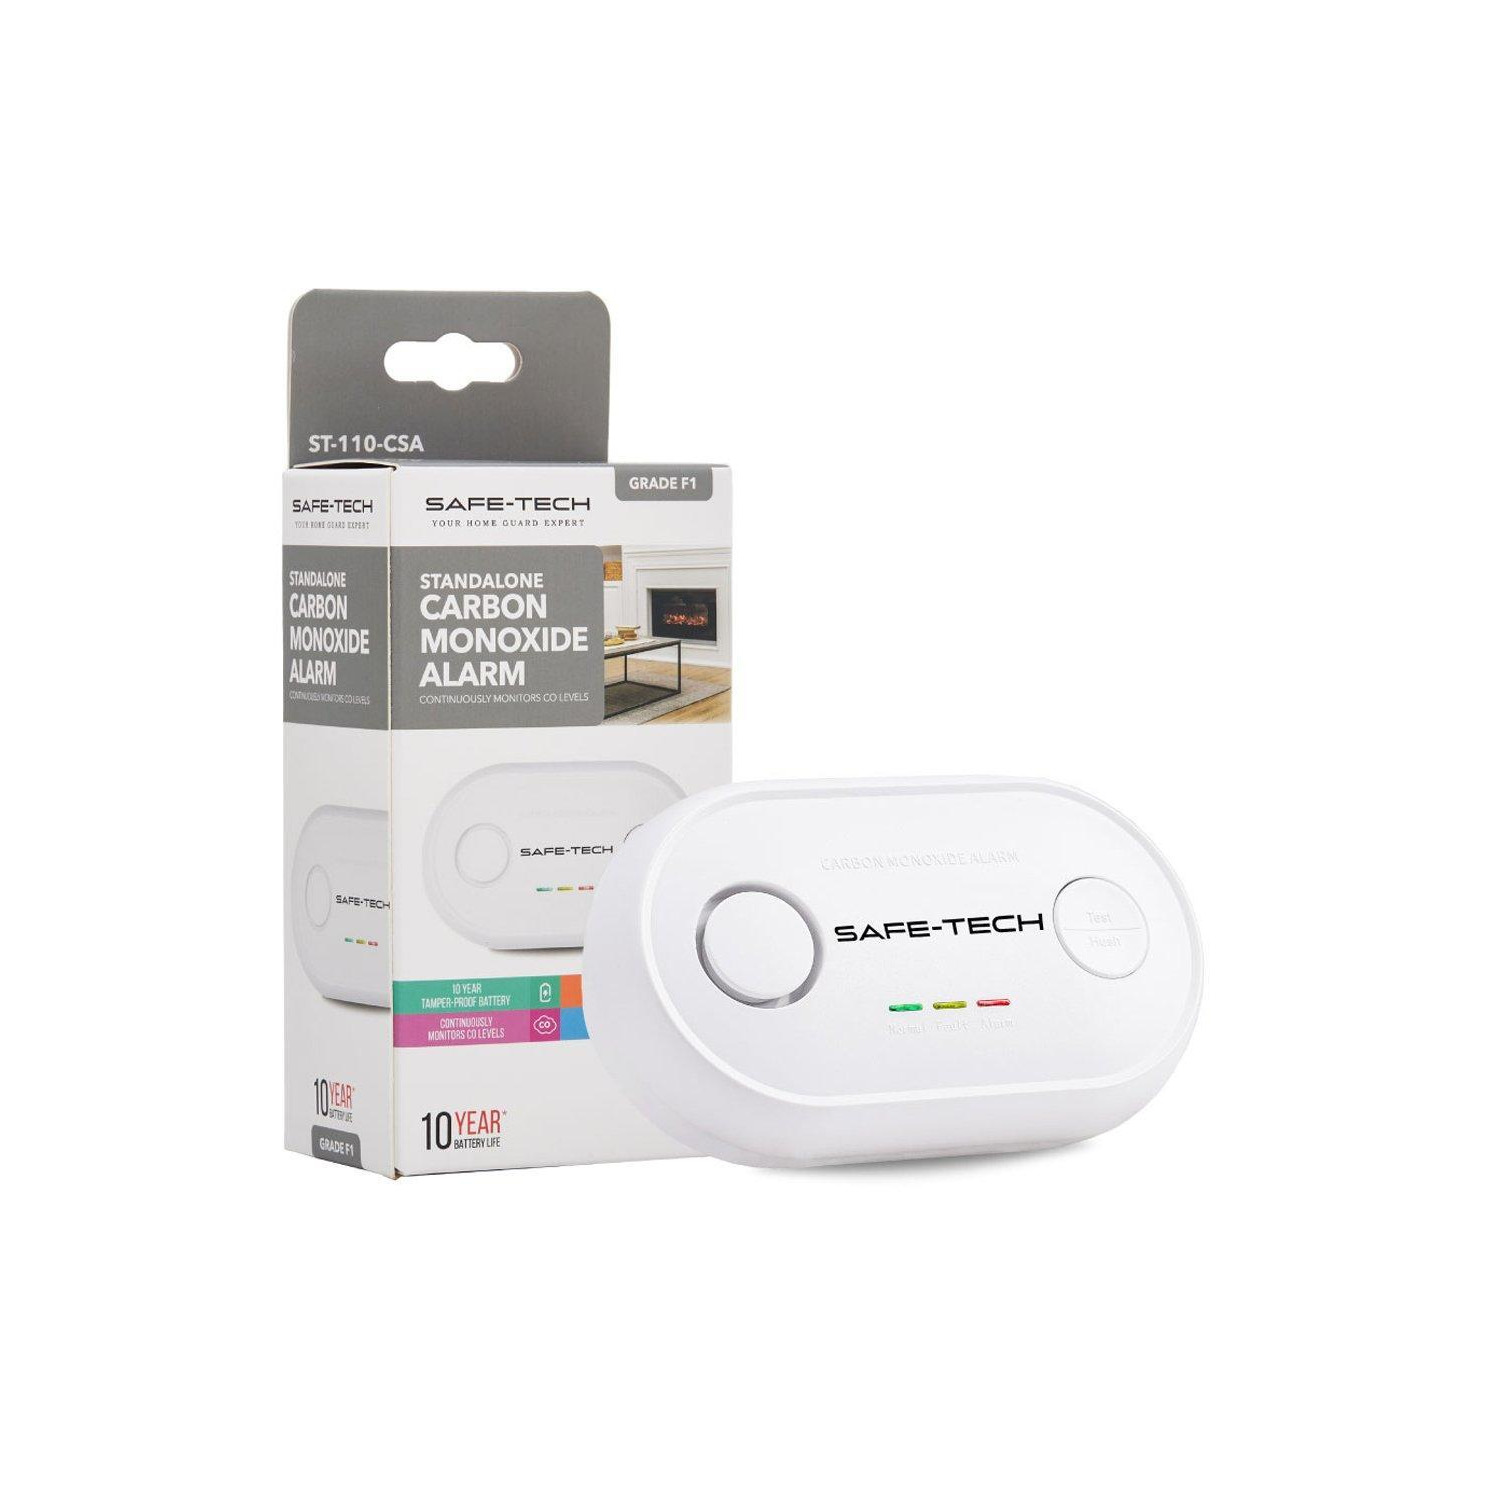 Standalone Carbon Monoxide Detector Alarm with 10 years Tamper-Proof Battery - image 1